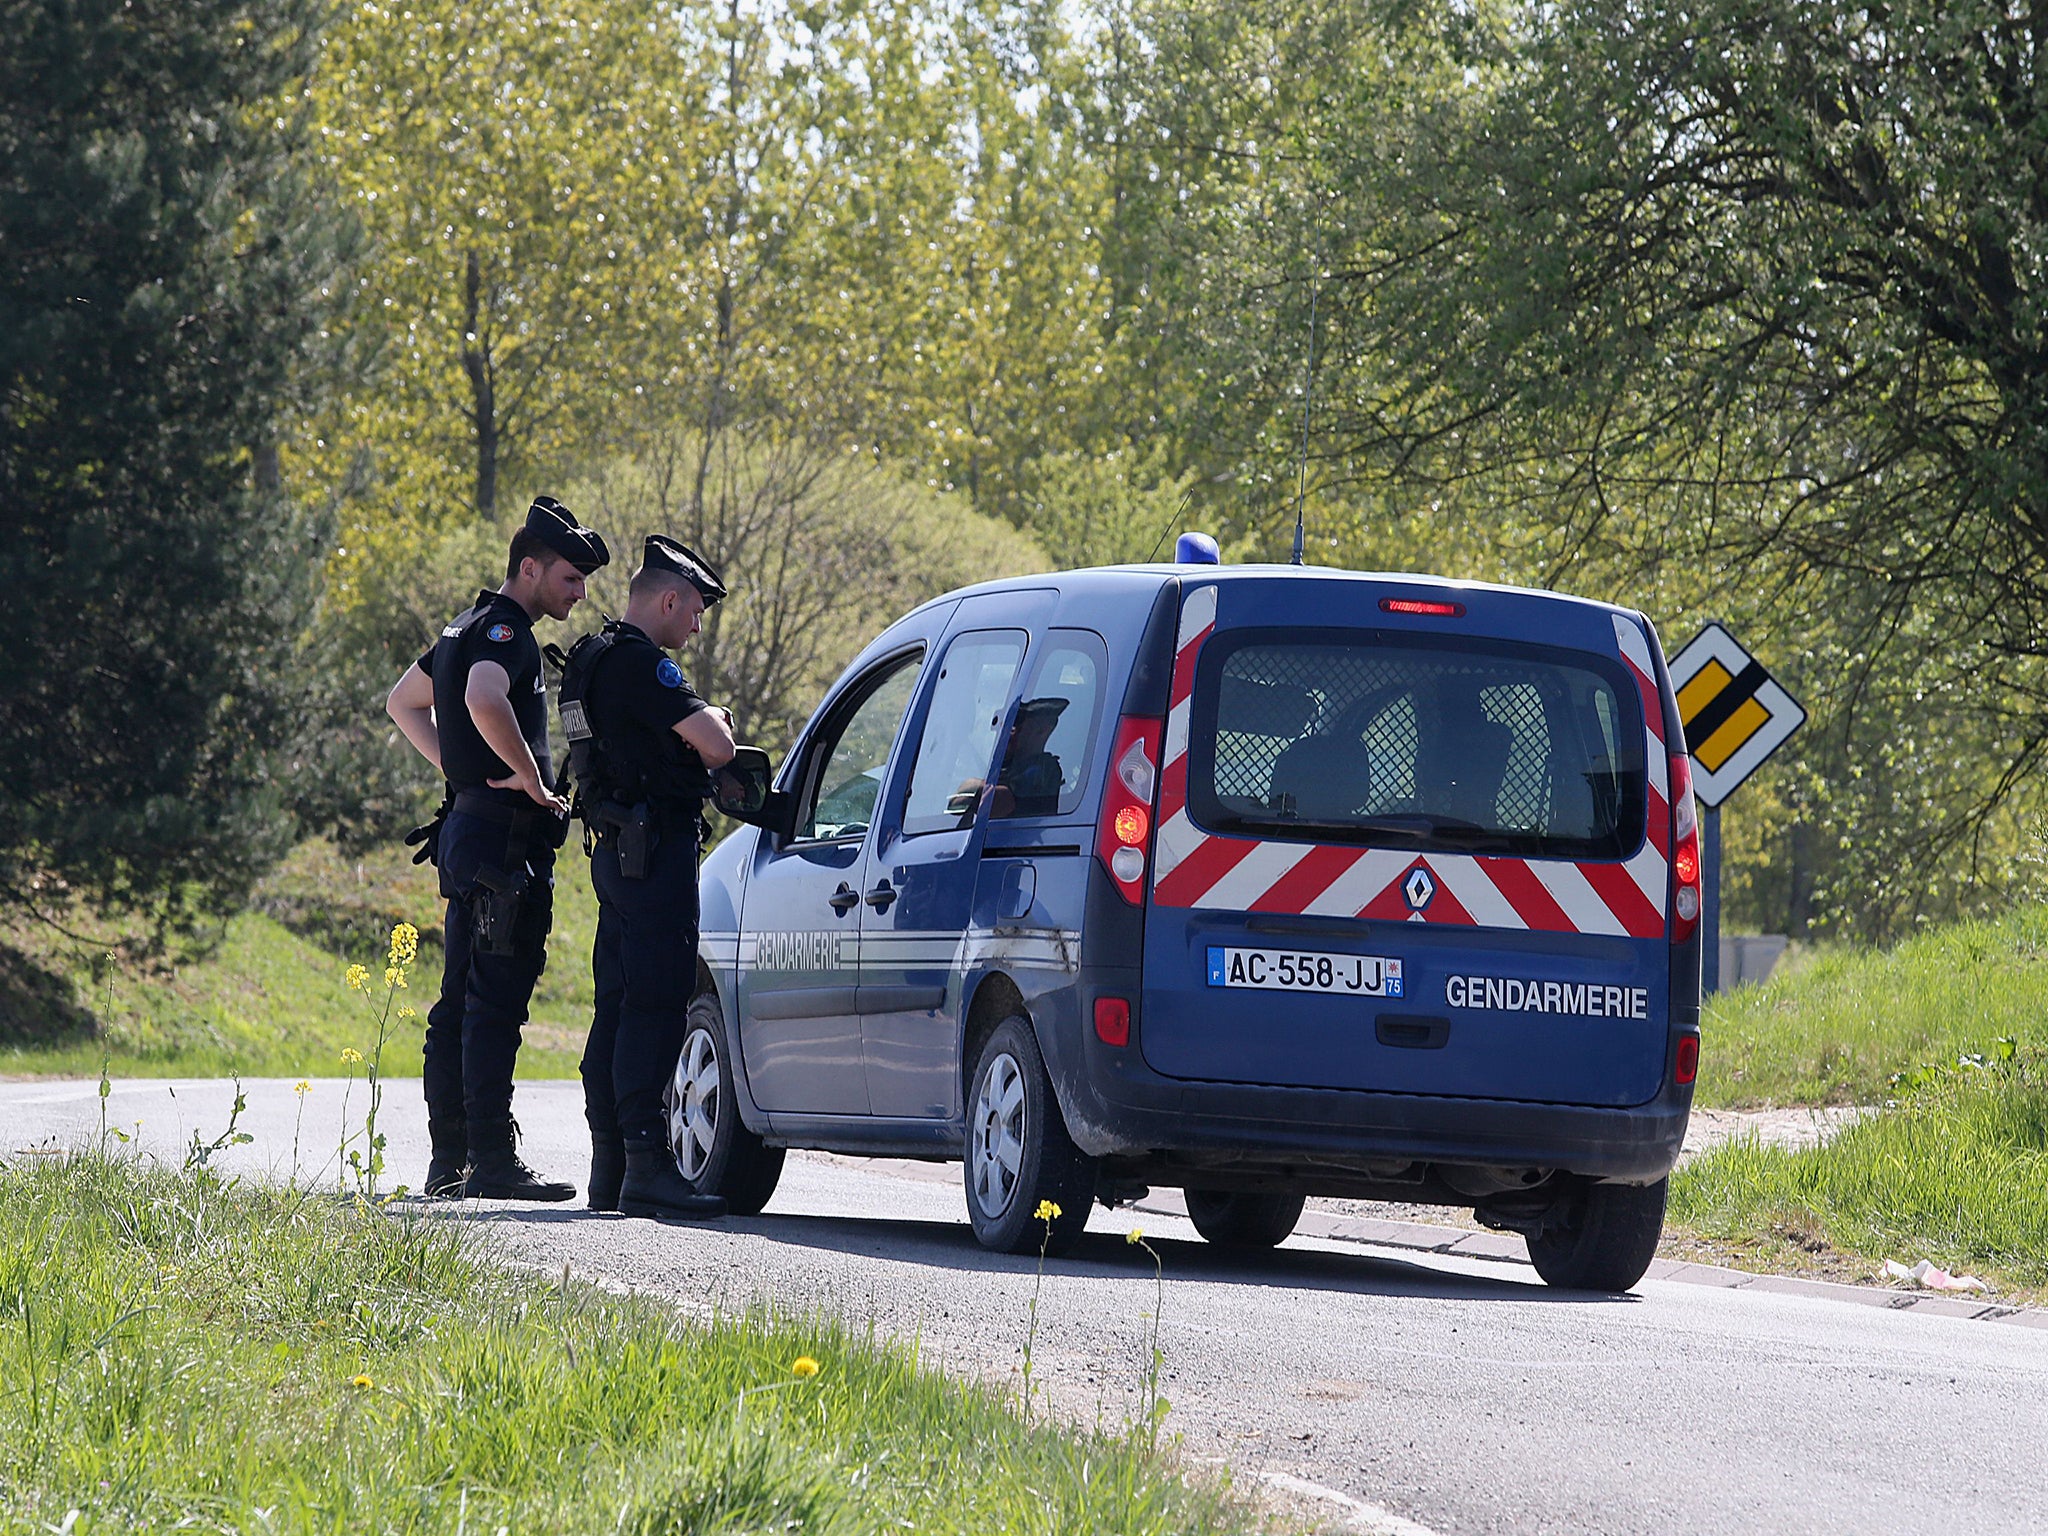 Gendarmes take part in research operations in the area of Grandpre, east of Reims, looking for the alleged kidnapper of 7-year-old girl Berenyss who was abducted on 23 April in Sancy, northeastern France, and found safe 8 hours later in Grandpre, some 120